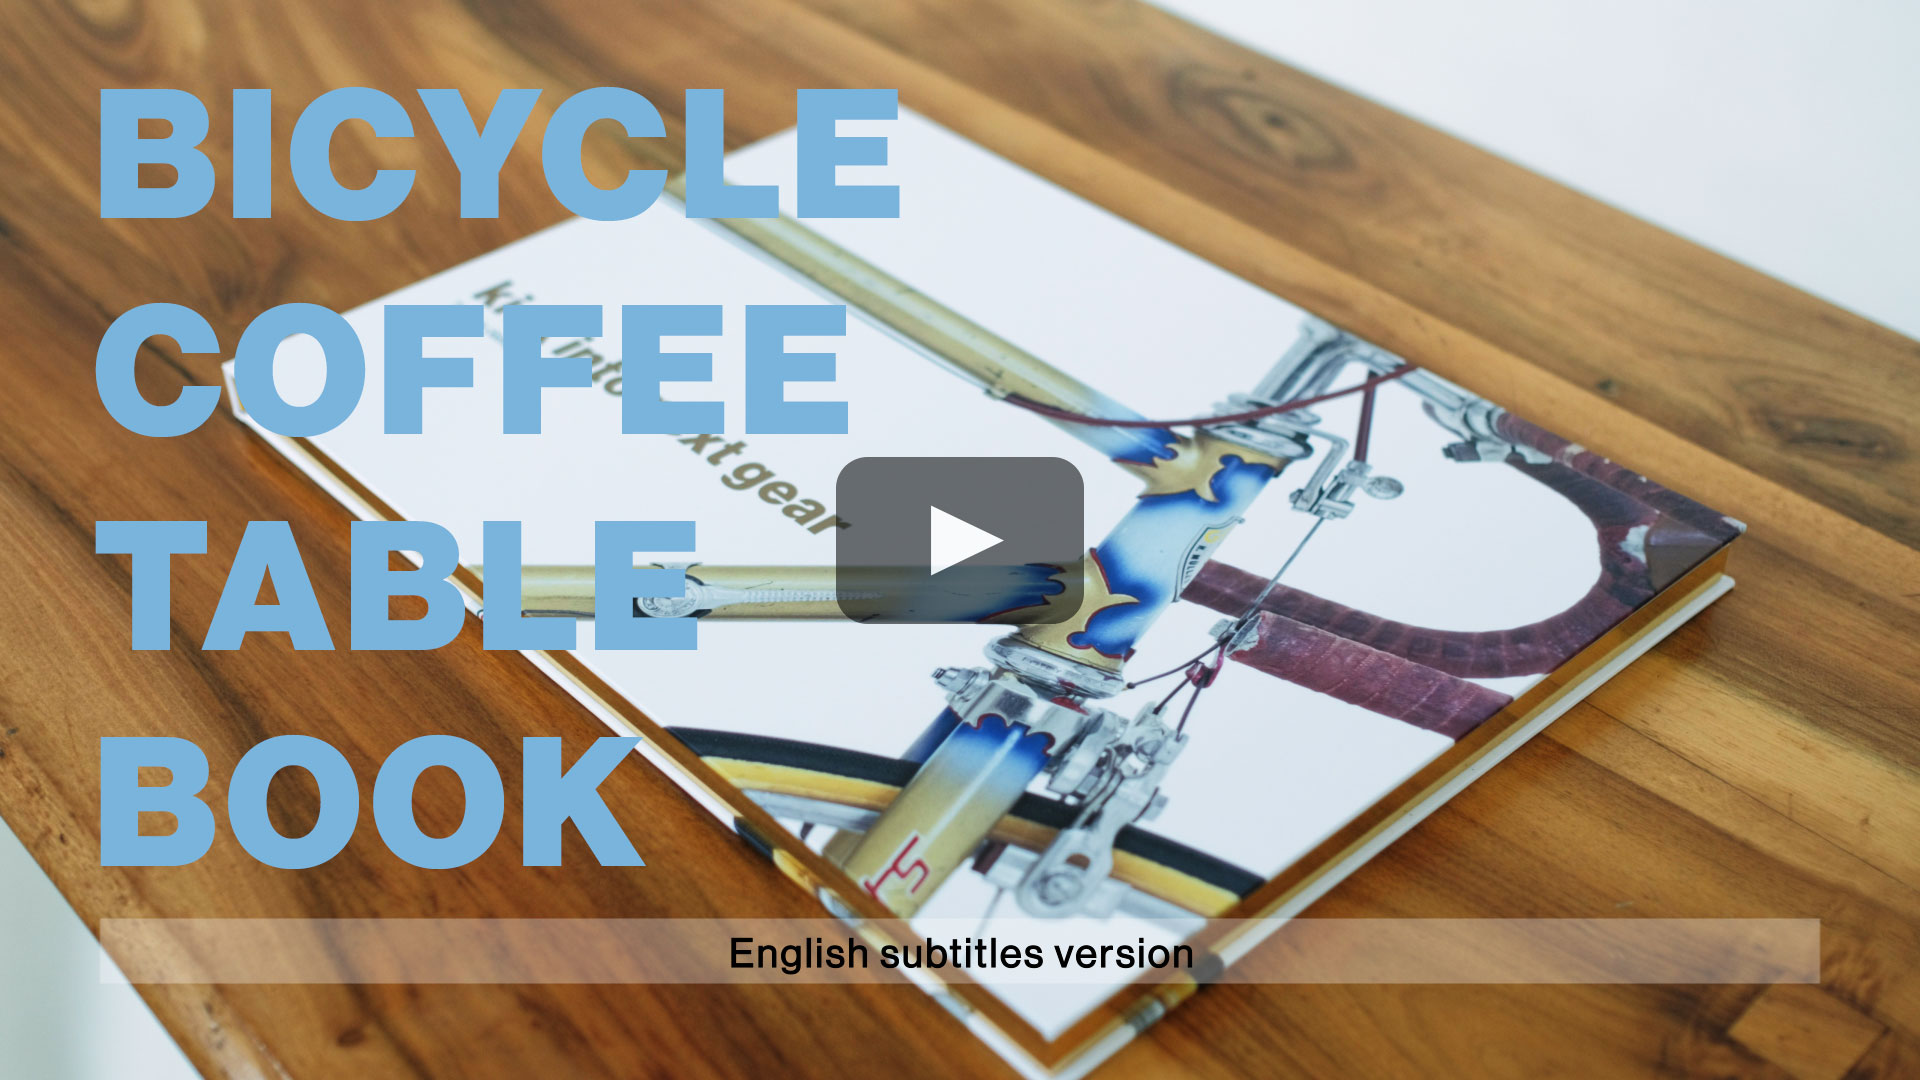 Bicycle Coffee Table Book kick into next gear